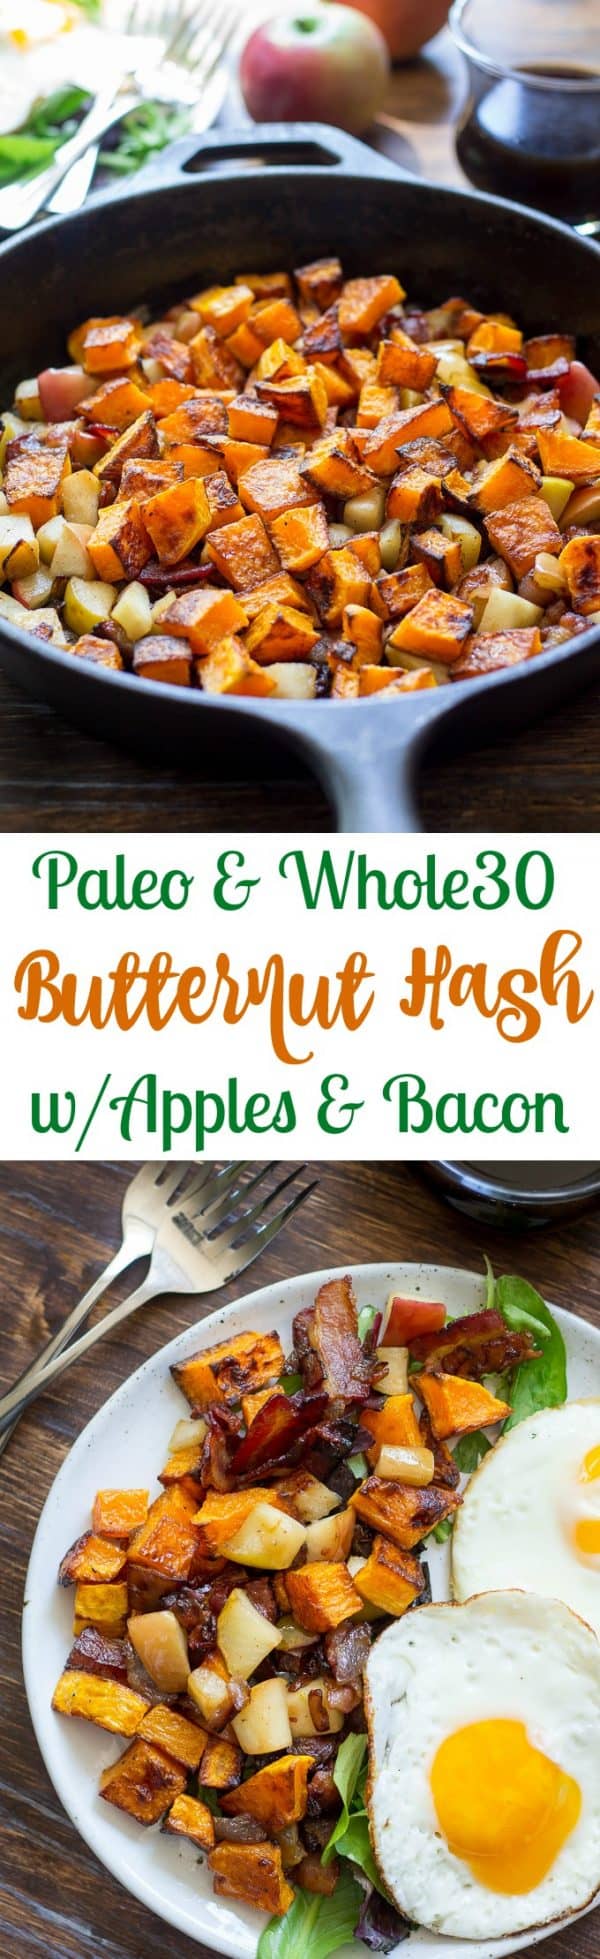 Roasted Butternut Squash Hash with Apples & Bacon {Paleo & Whole30}